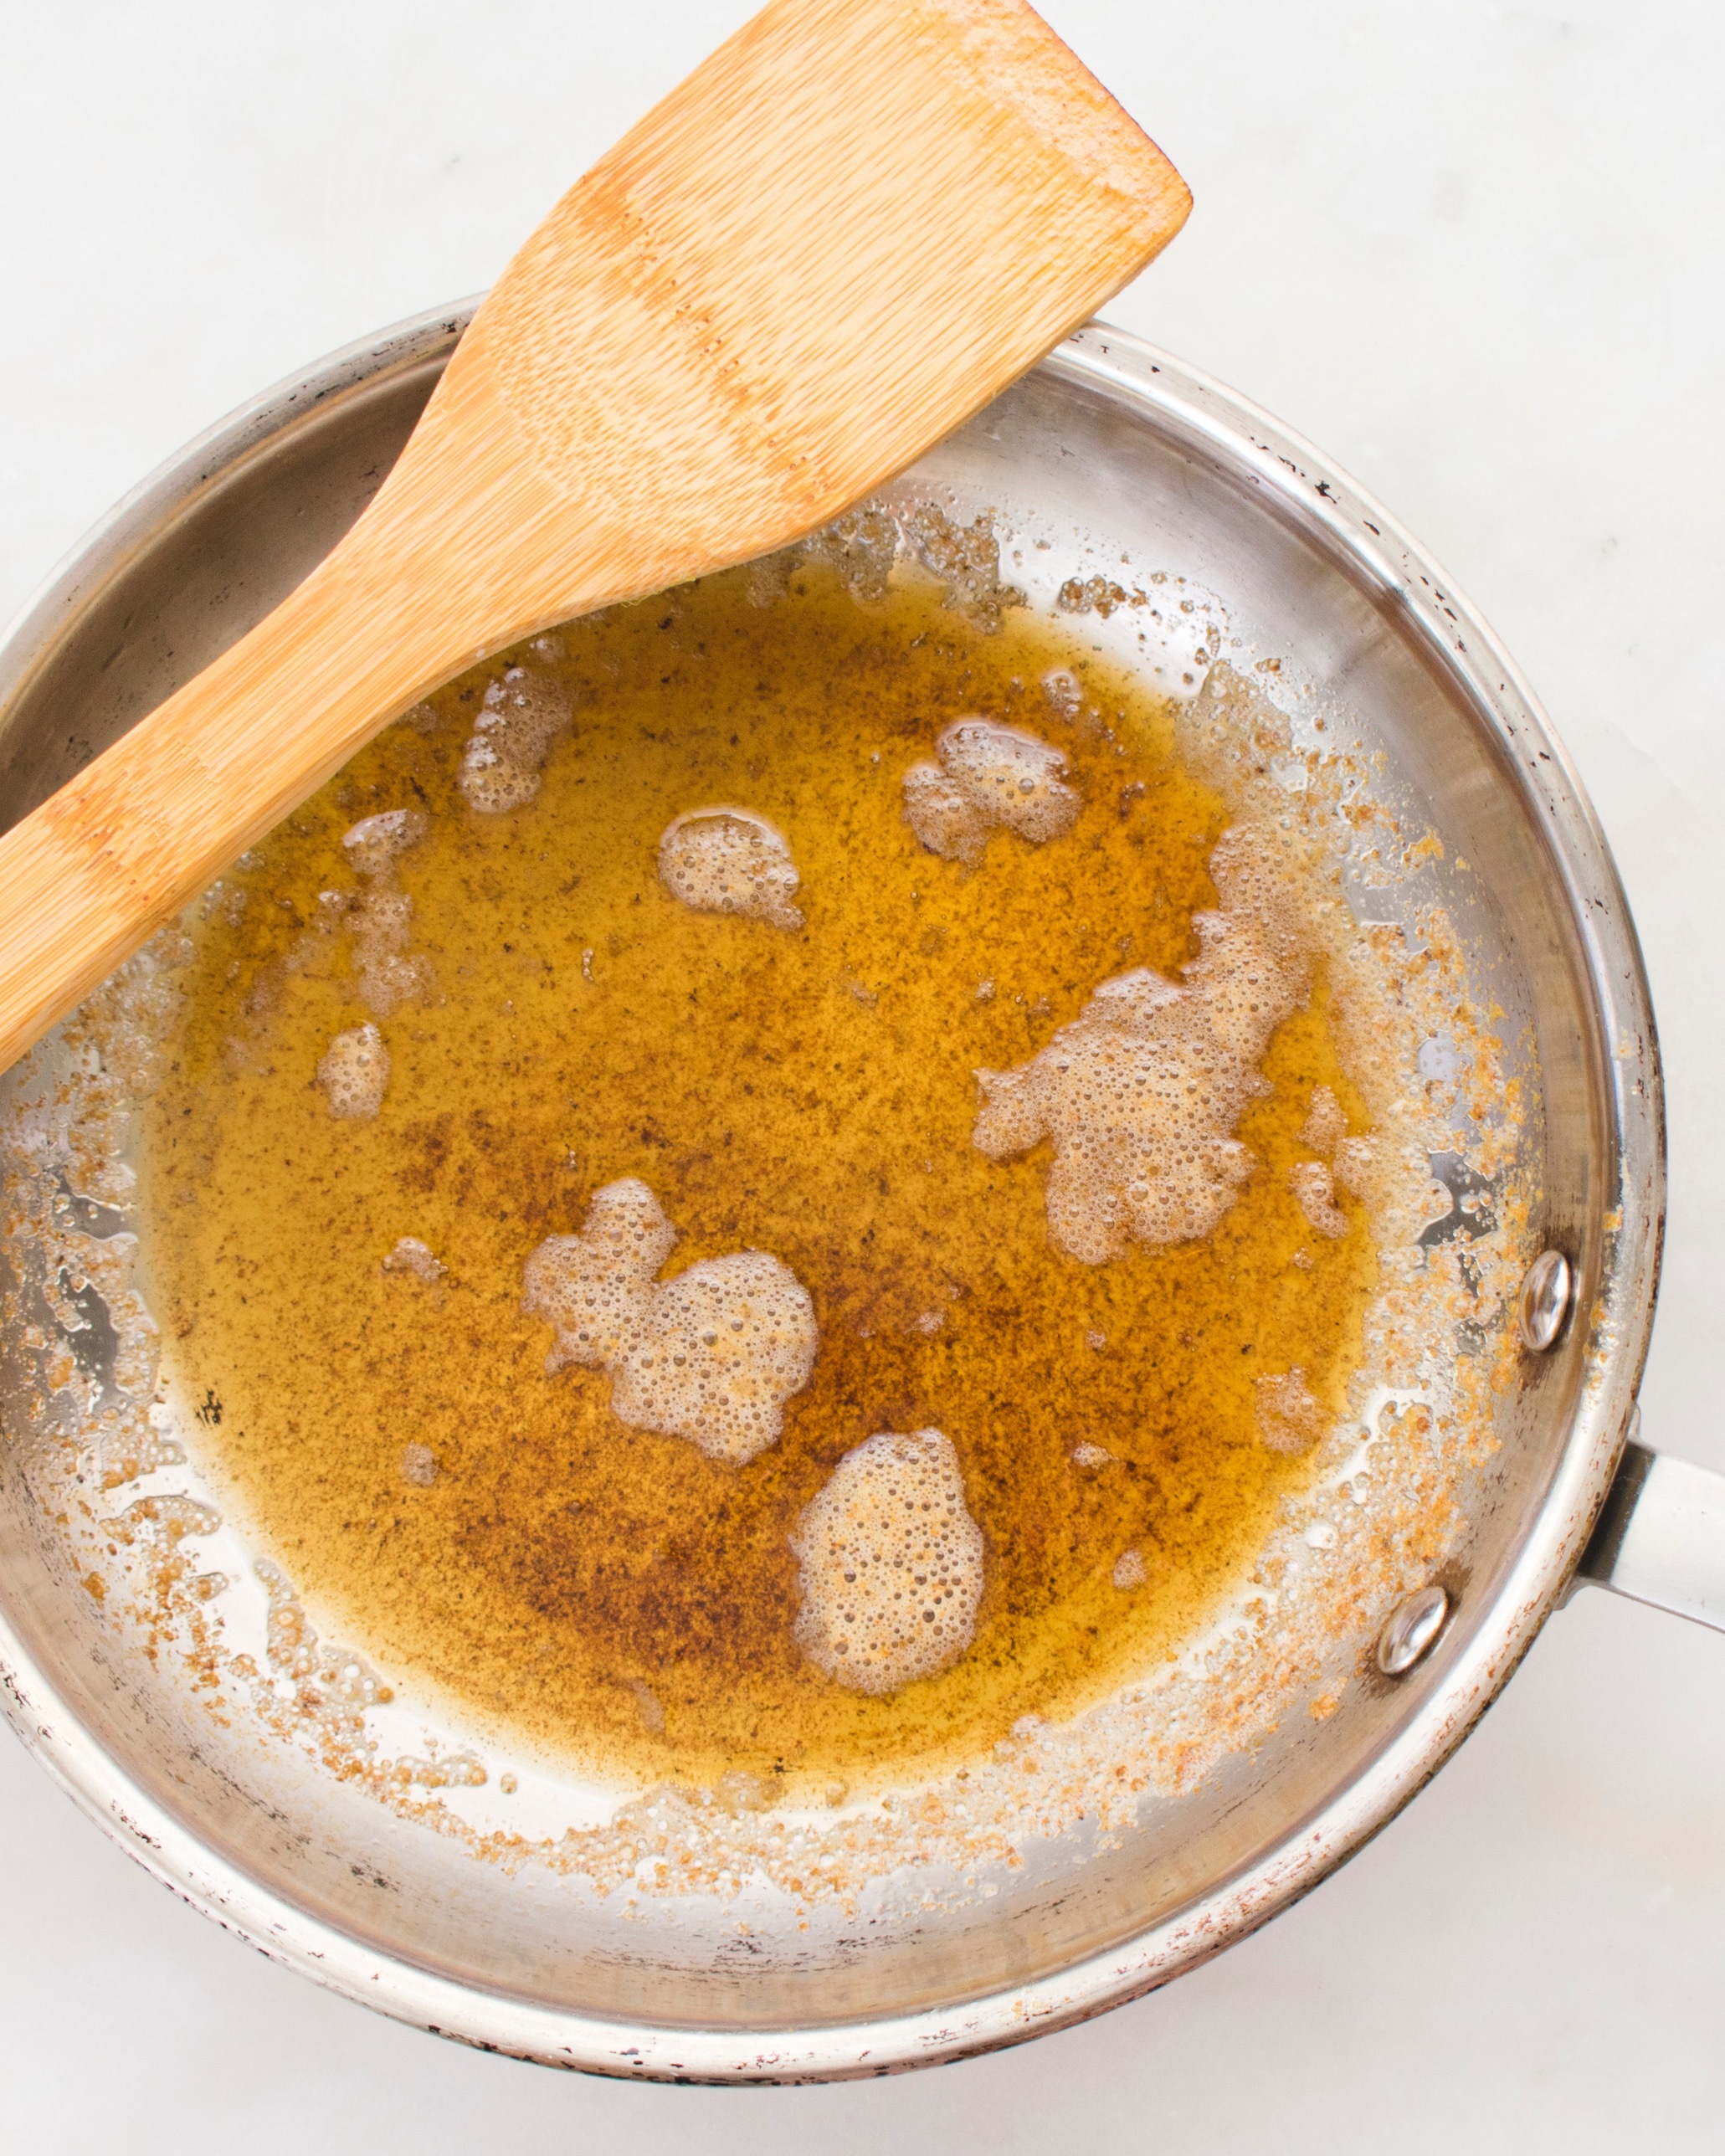 Thermomix recipe: Beurre Noisette or Brown Butter